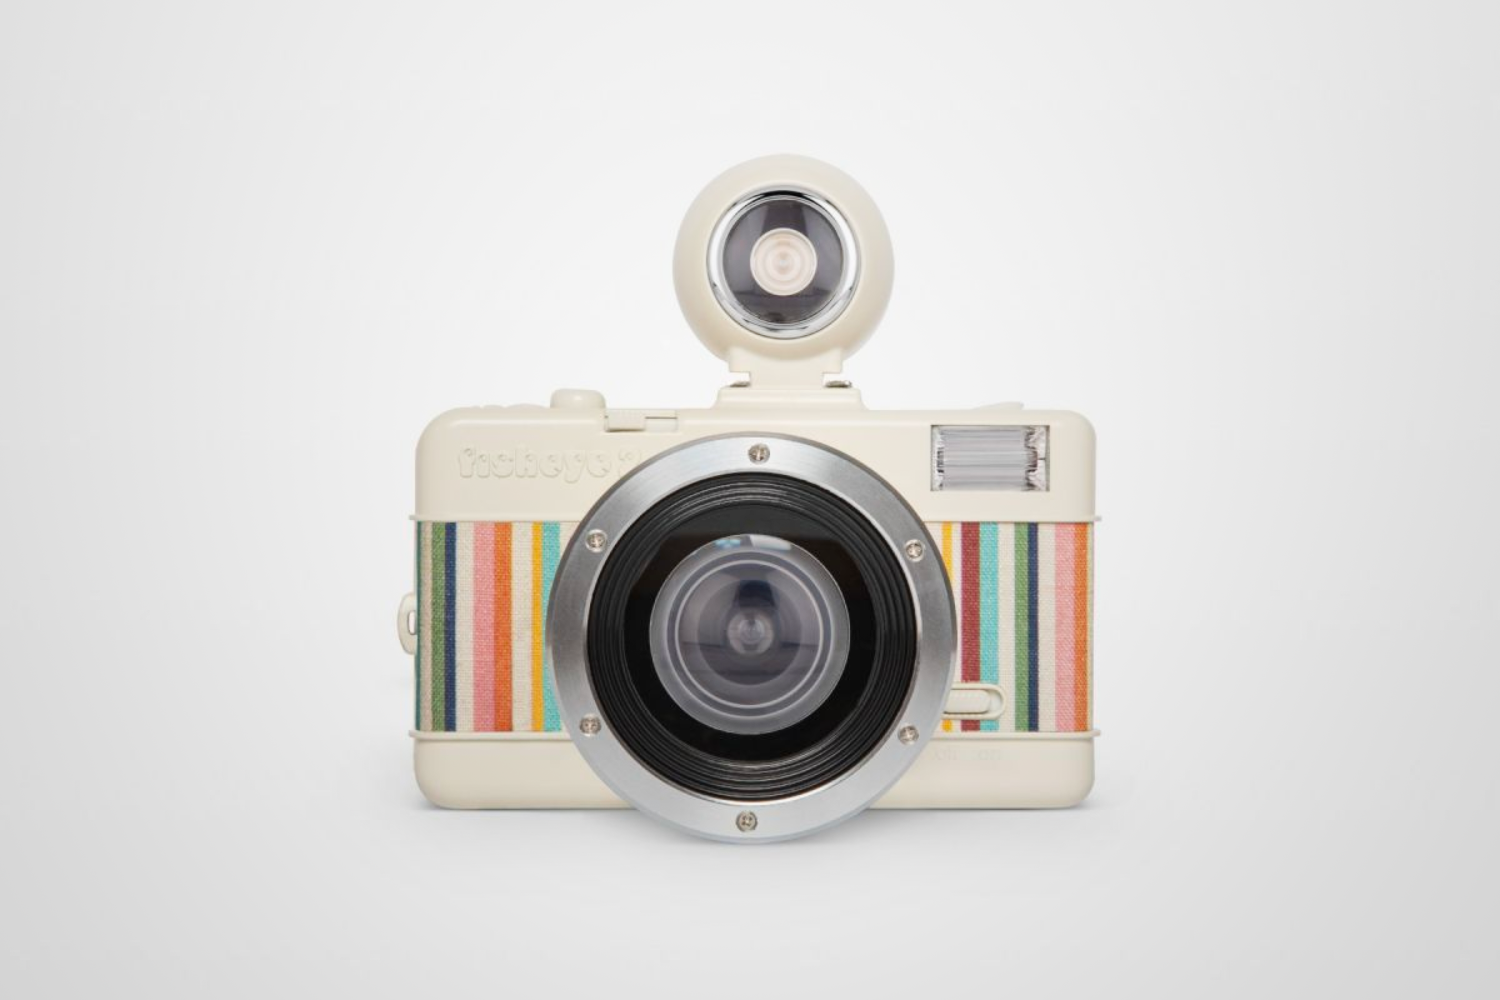 53 Unique Gifts for Photographers - The Photo Argus